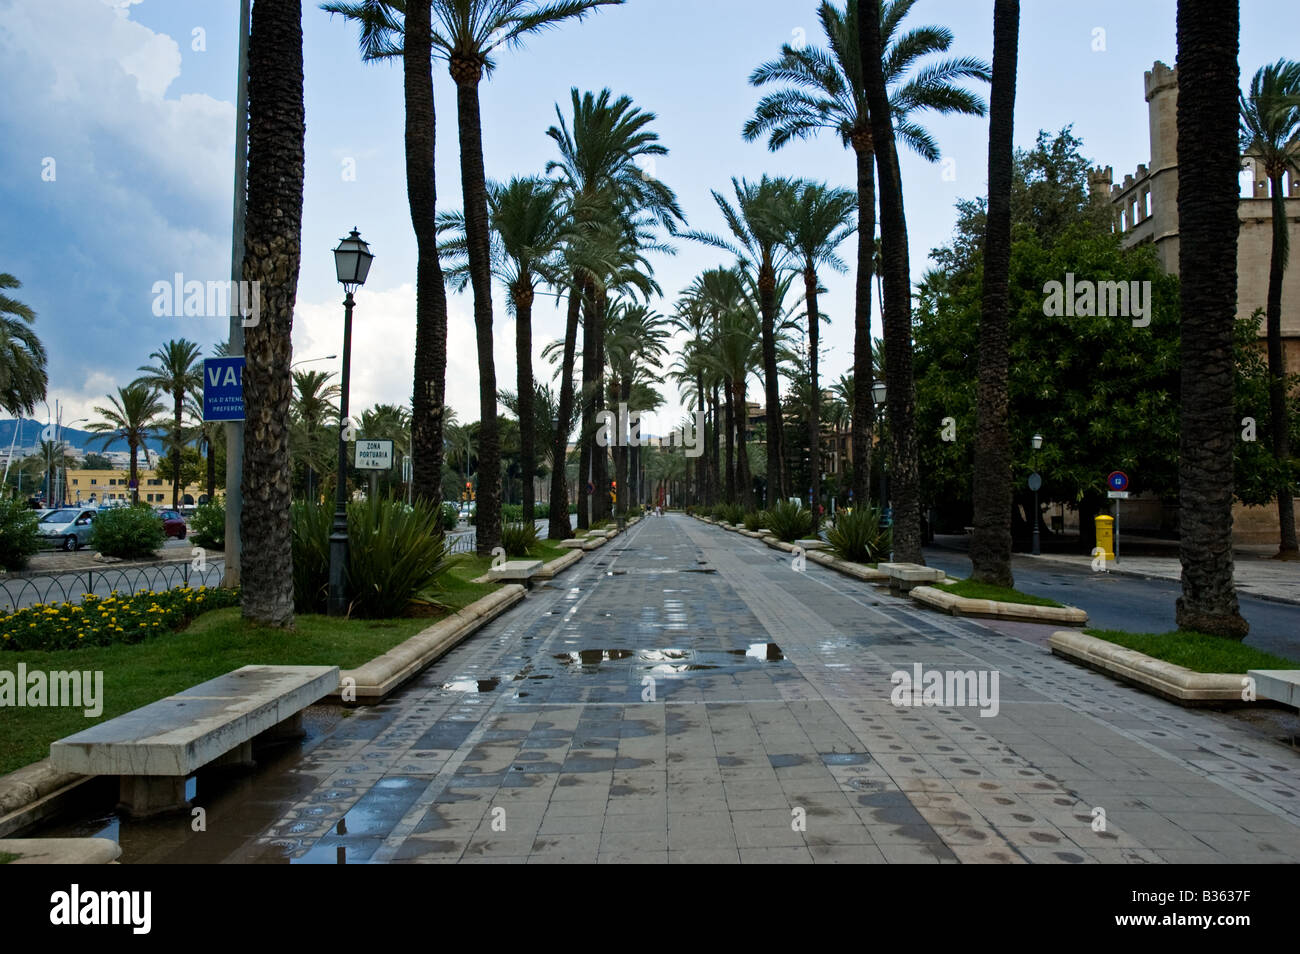 A Pedestrianised Boulevard lined with Palm Trees after a storm in Palma de Mallorca Stock Photo